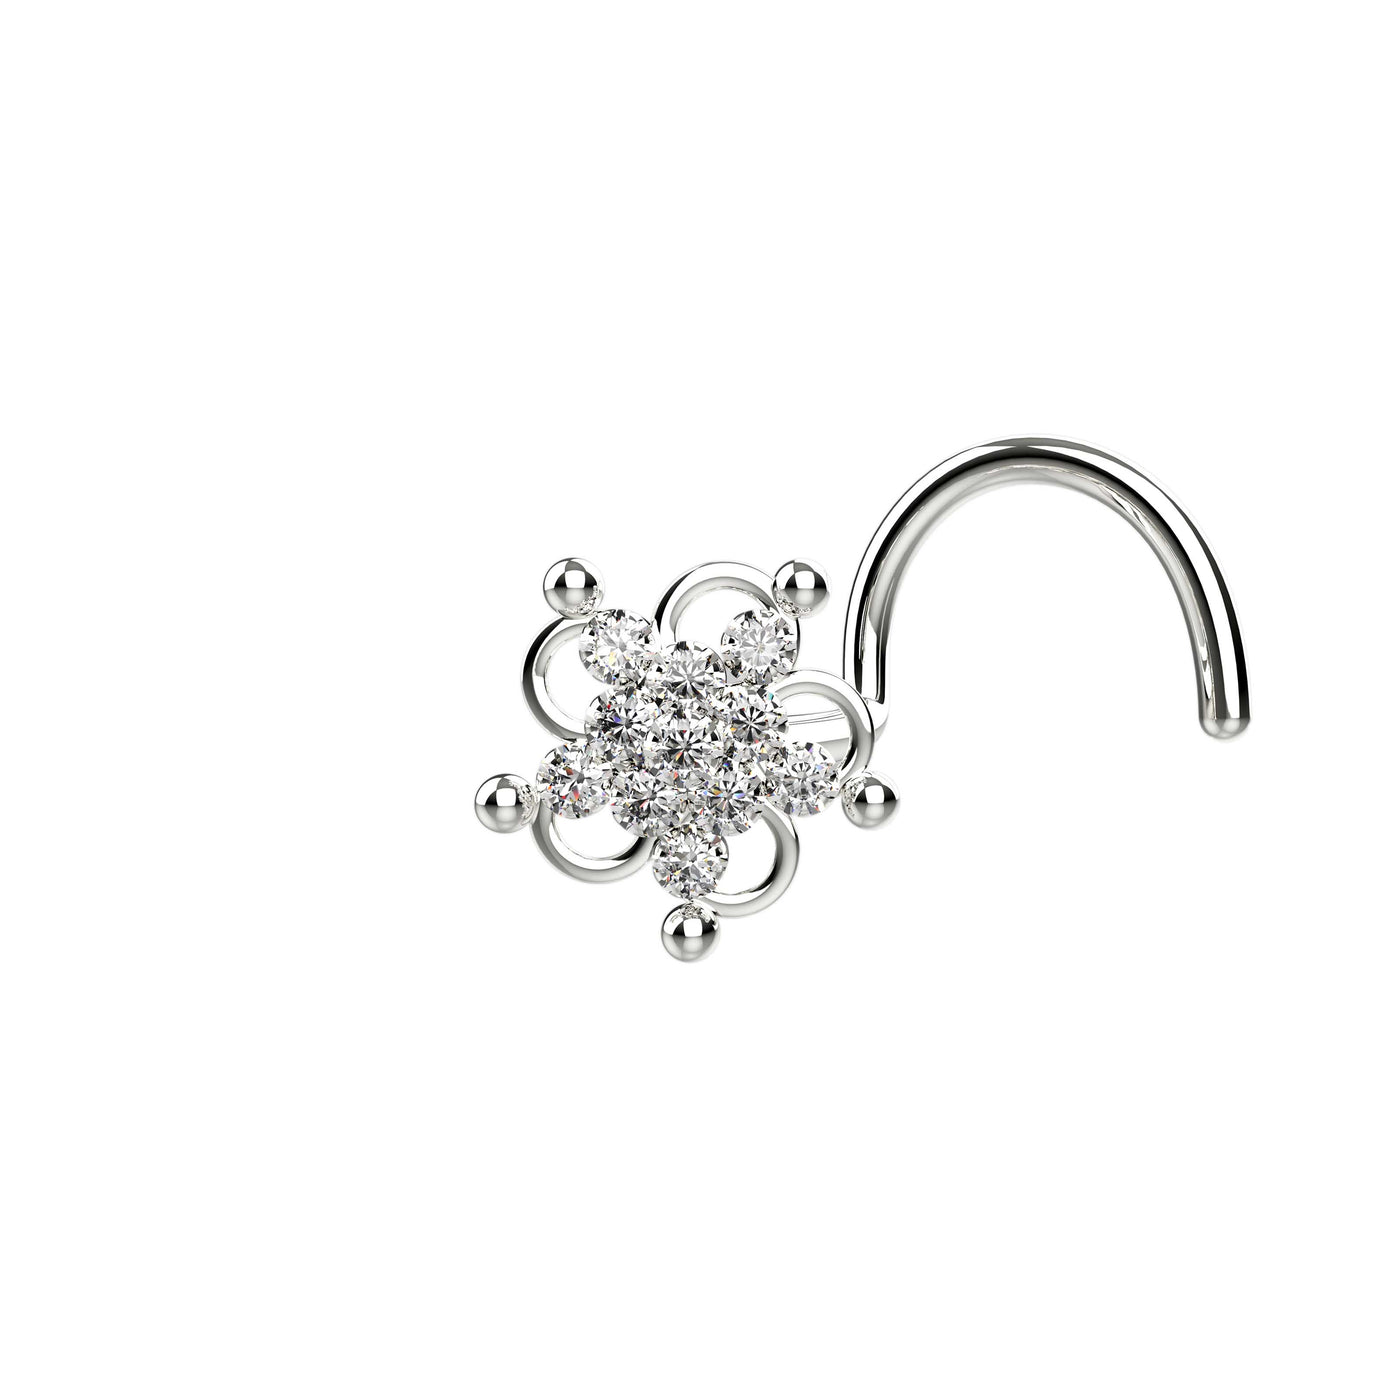 Trendy silver nose stud rings